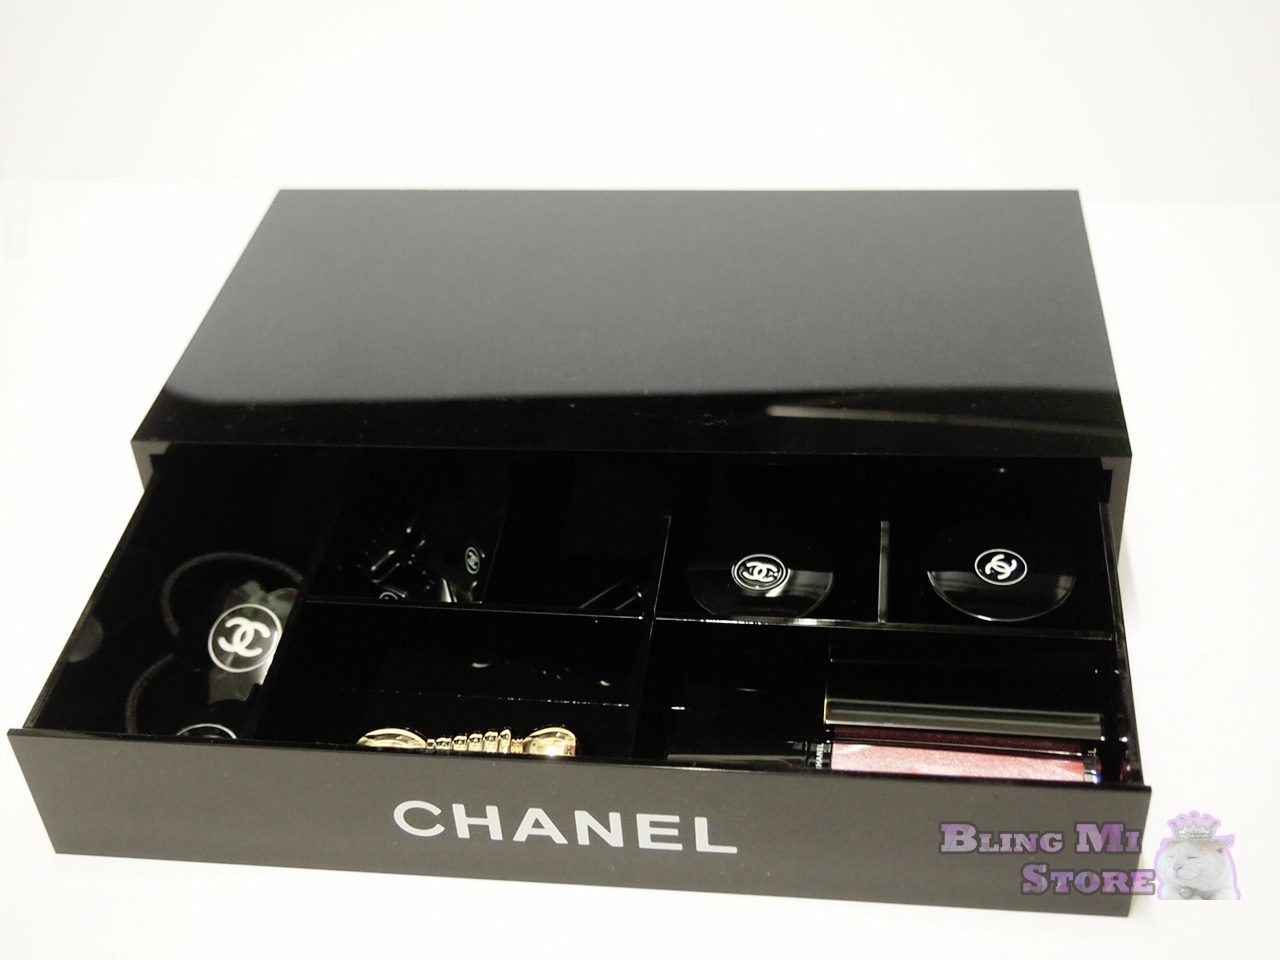 Chanel VIP Classic gift item Black White Cosmetic Makeup Jewelry  Case/Box/Tray /Organizer